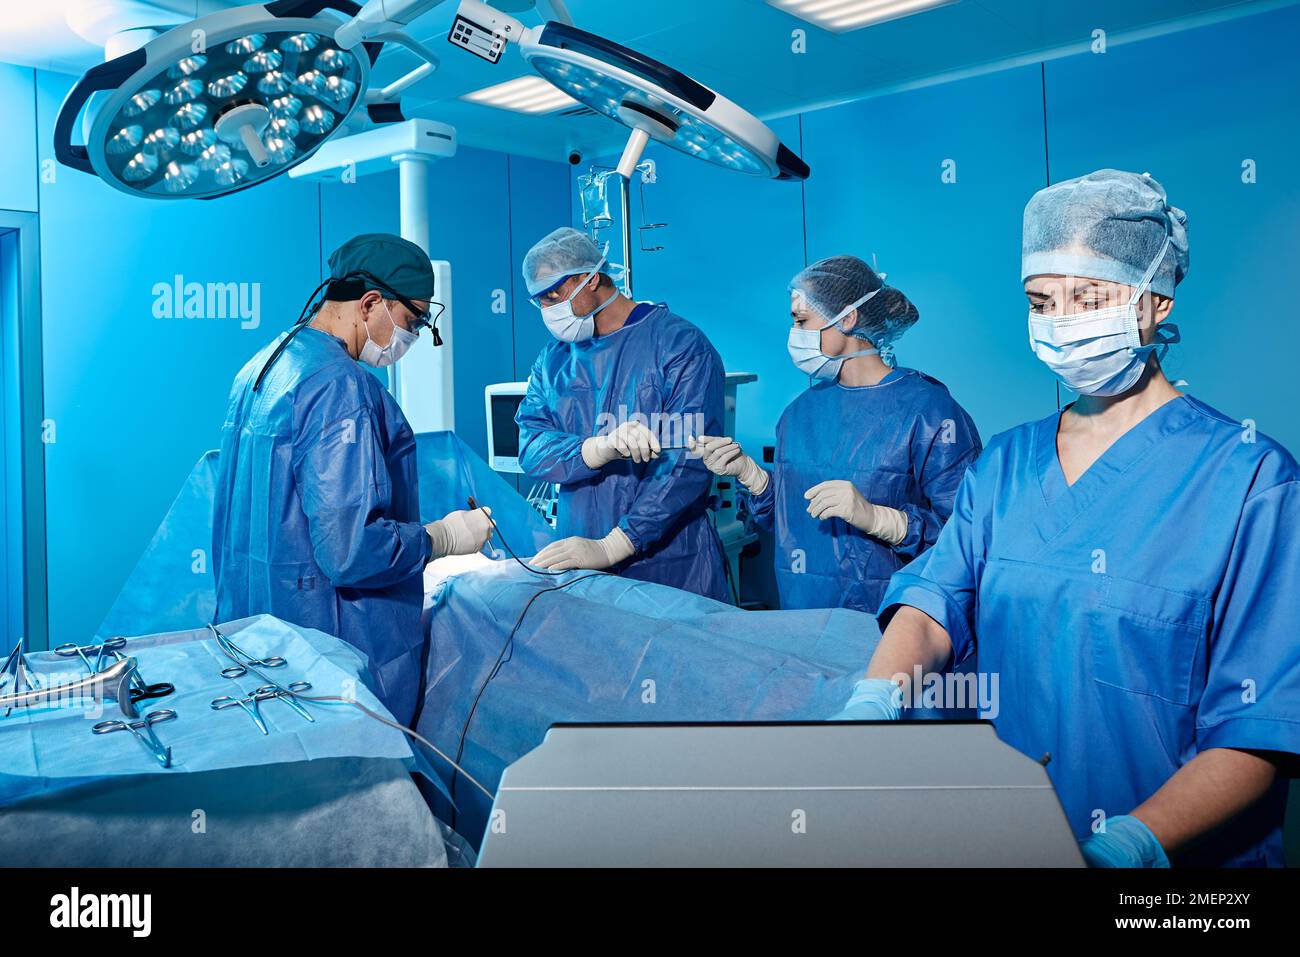 hospital operating theatre with medical team wearing personal protective equipment while surgical operation. Teamwork in surgical department Stock Photo